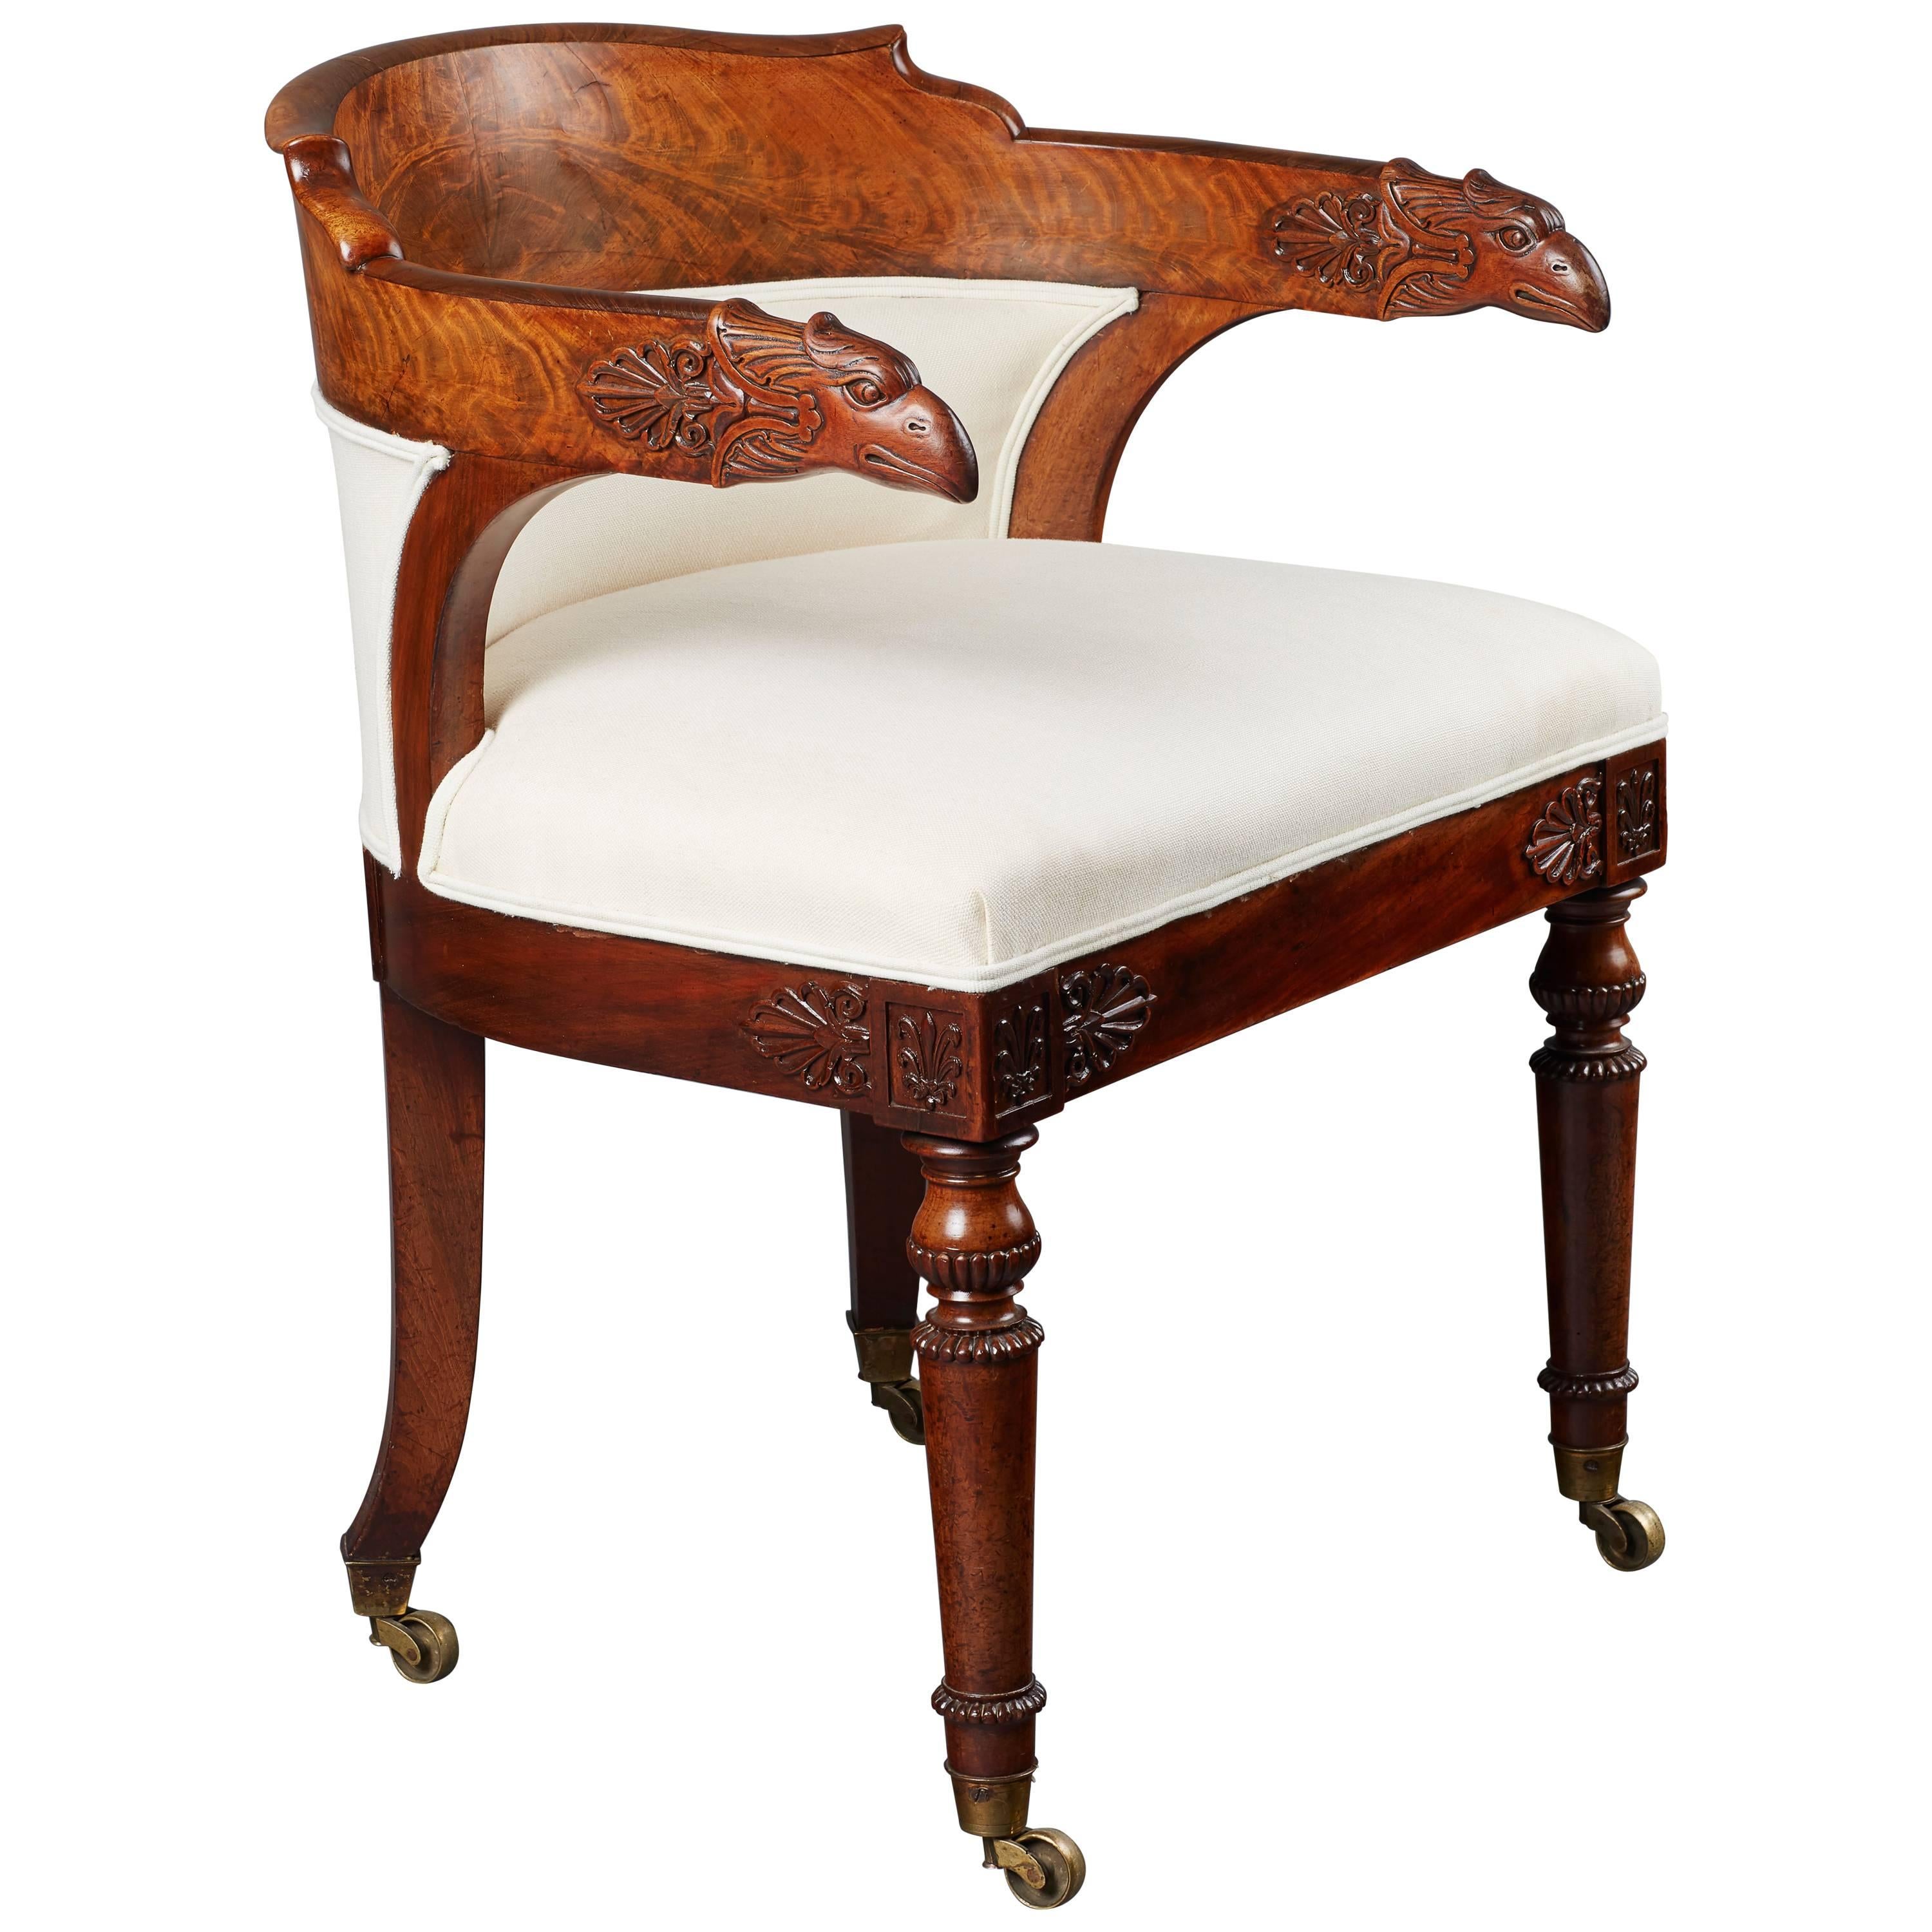 Neoclassical Empire Early 19th Century Mahogany Desk Armchair For Sale